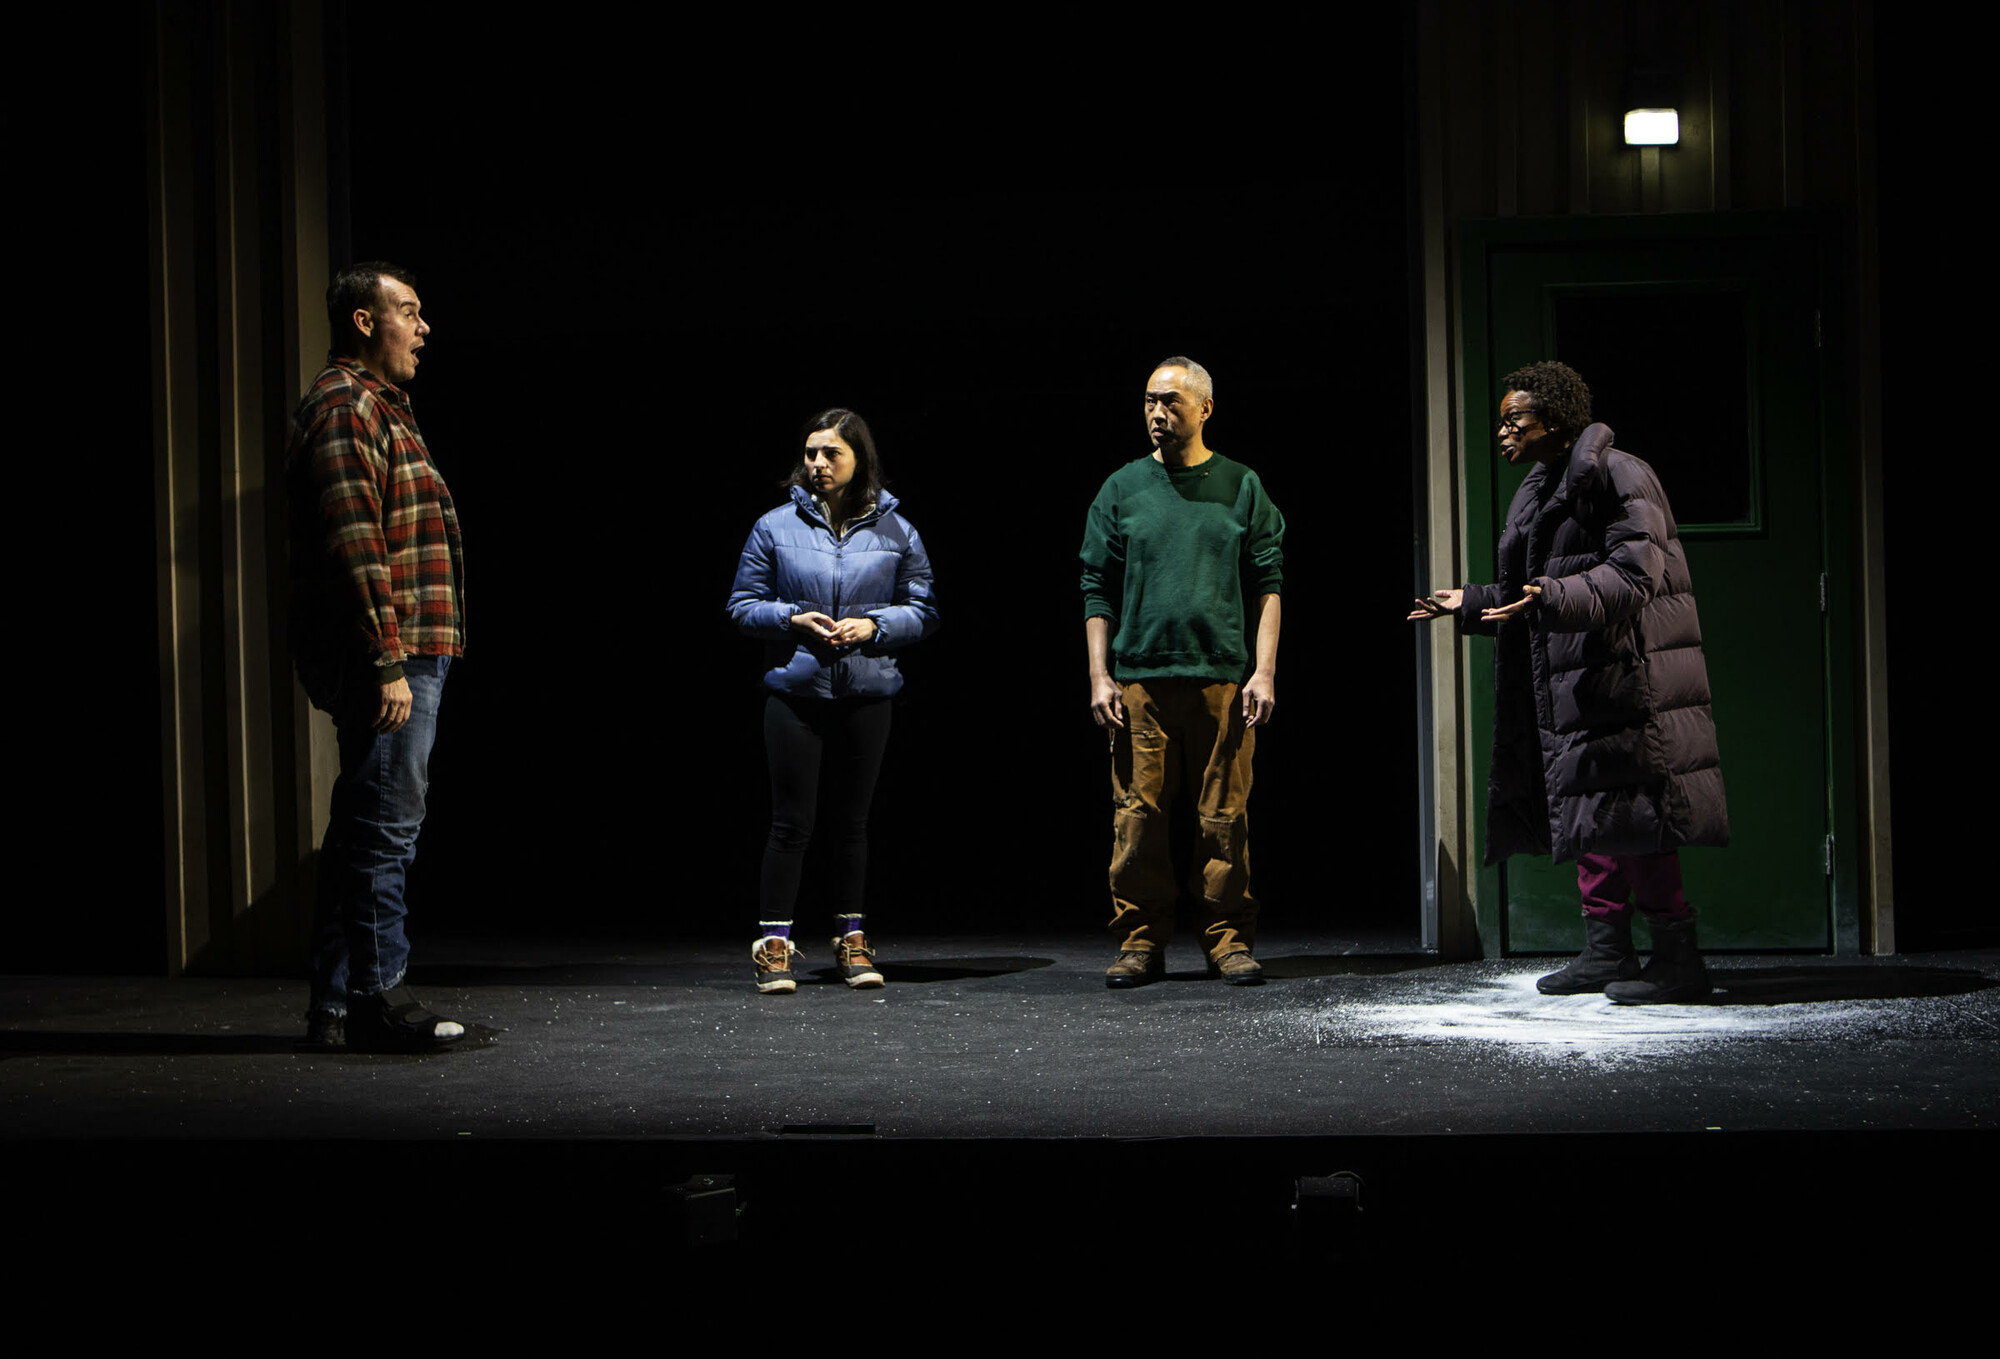 Four performers stand on a dimly lit stage and speak to each other.